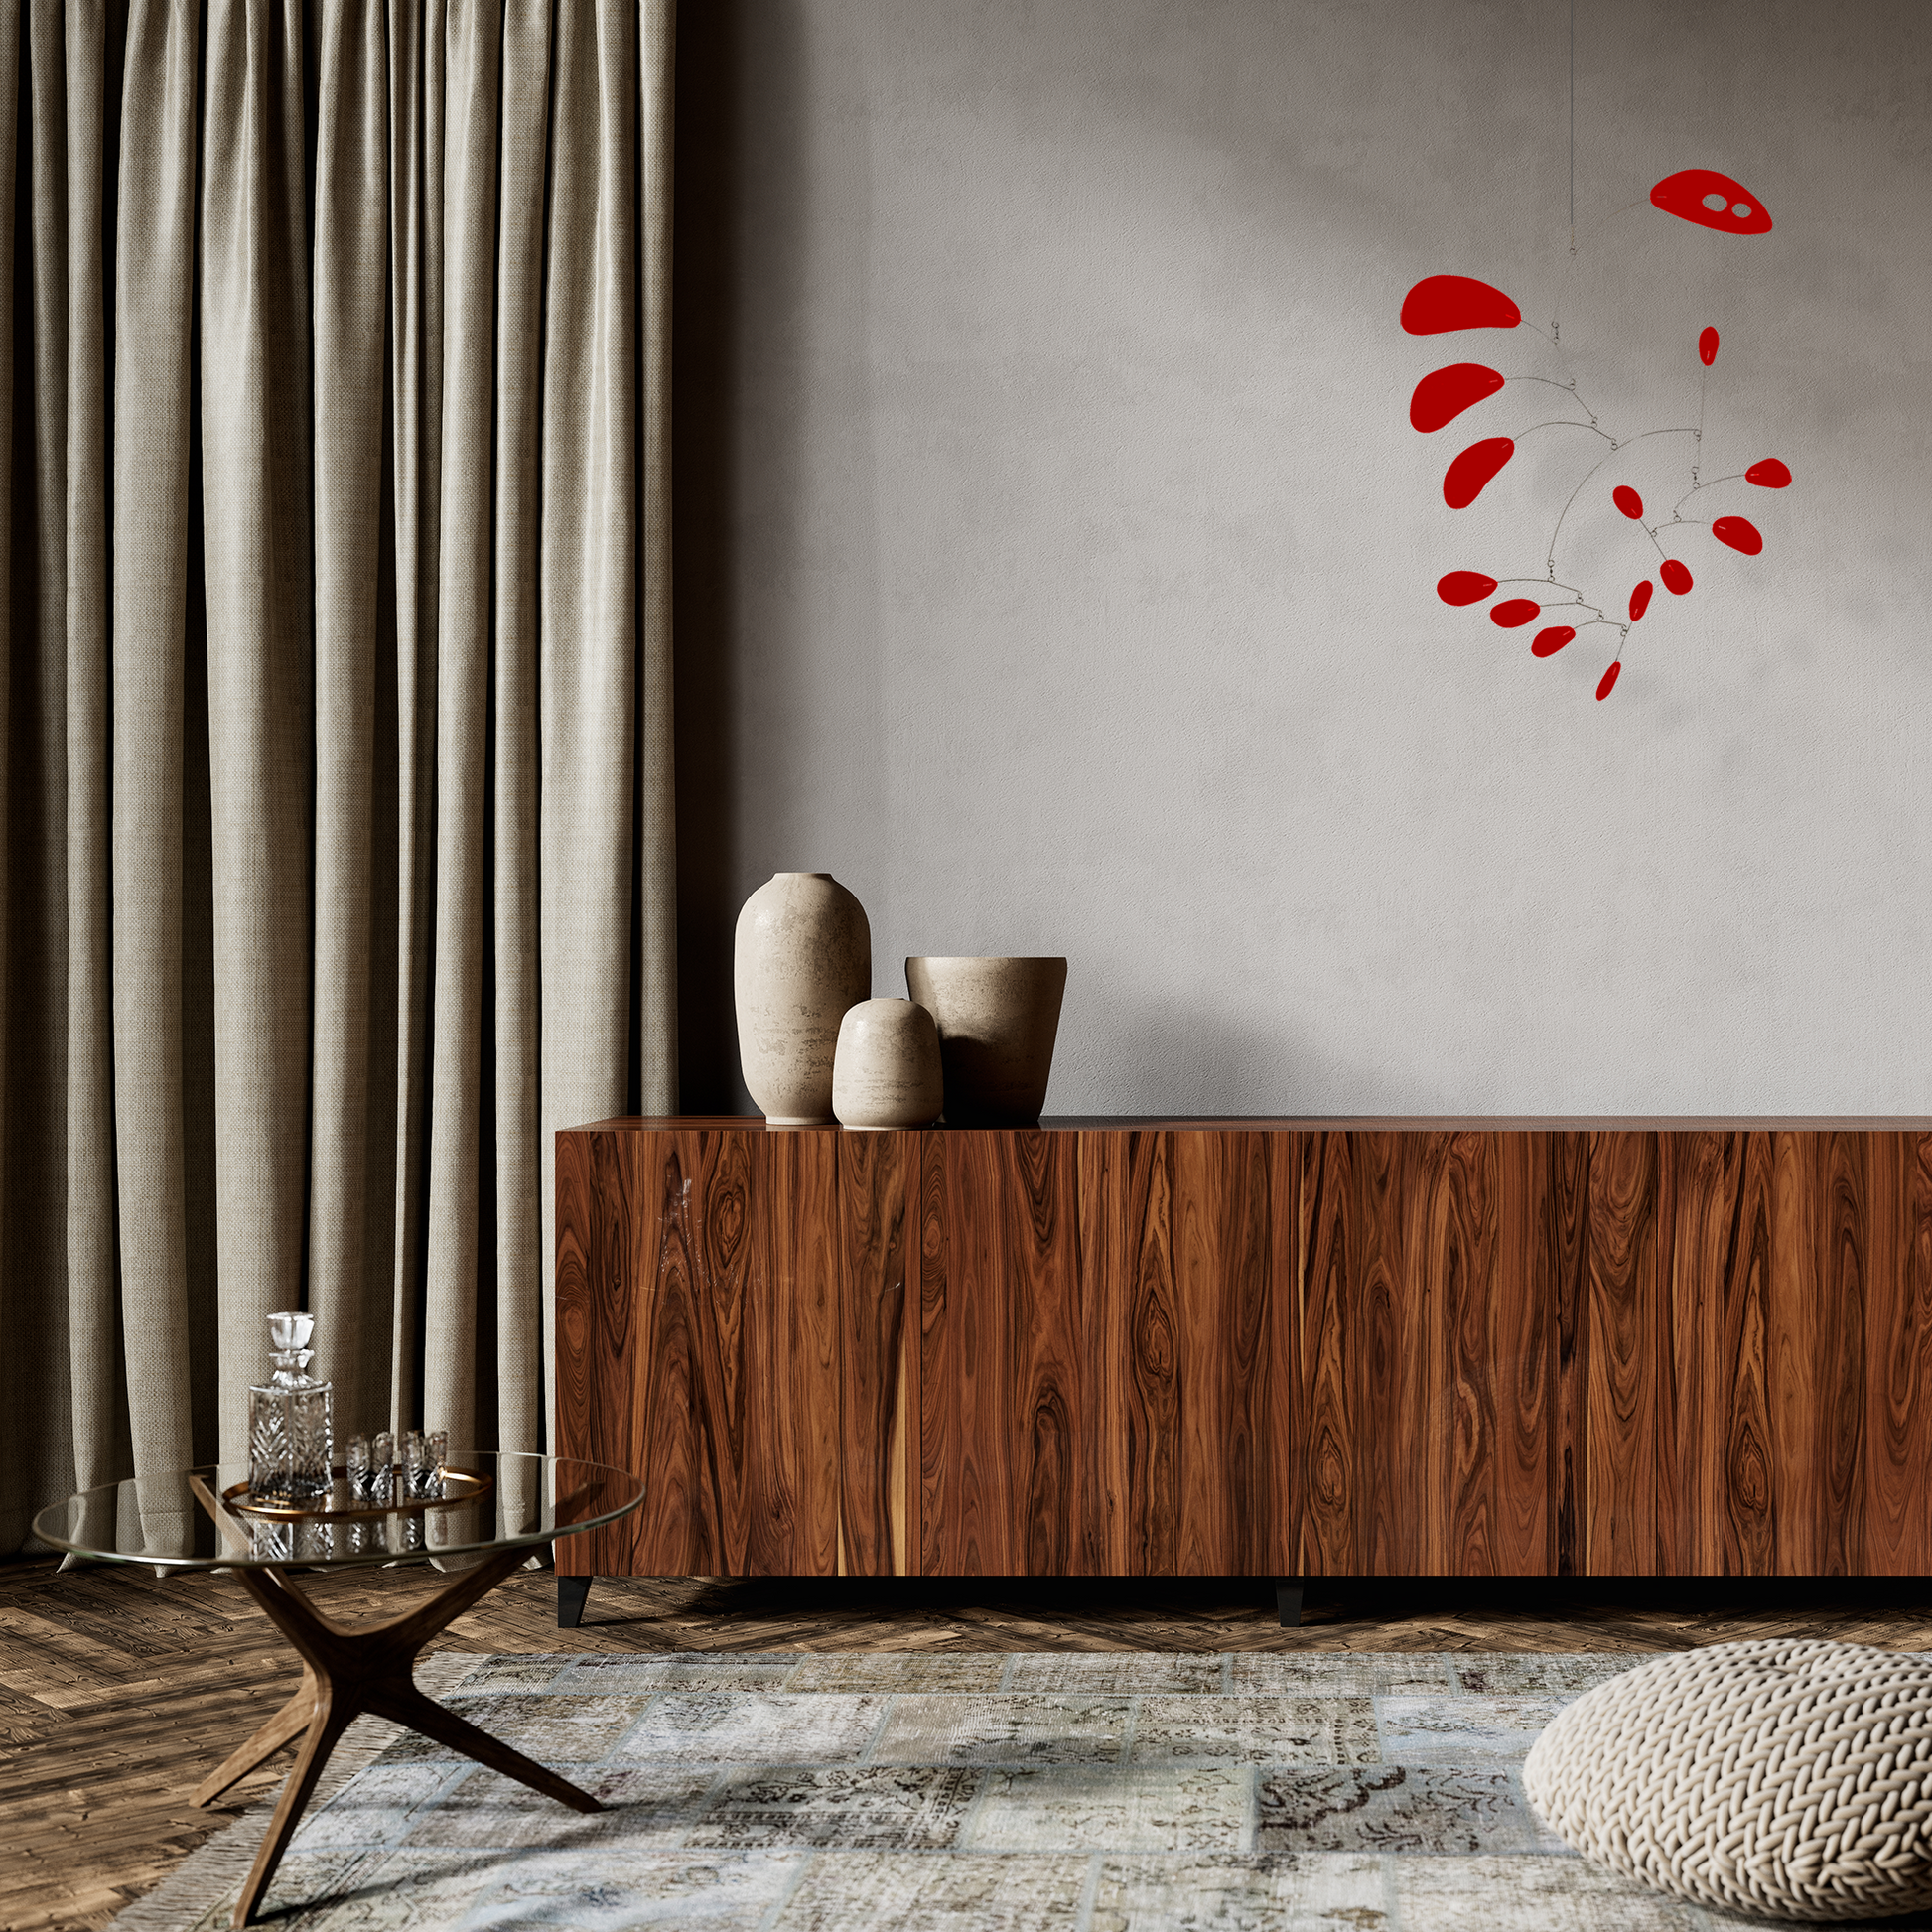 Red CoolCat Hanging Art Mobile in modern room with wood sideboard credenza, pottery, beige drapes, andn a clear modern table with a bar setting - mobiles by AtomicMobiles.com